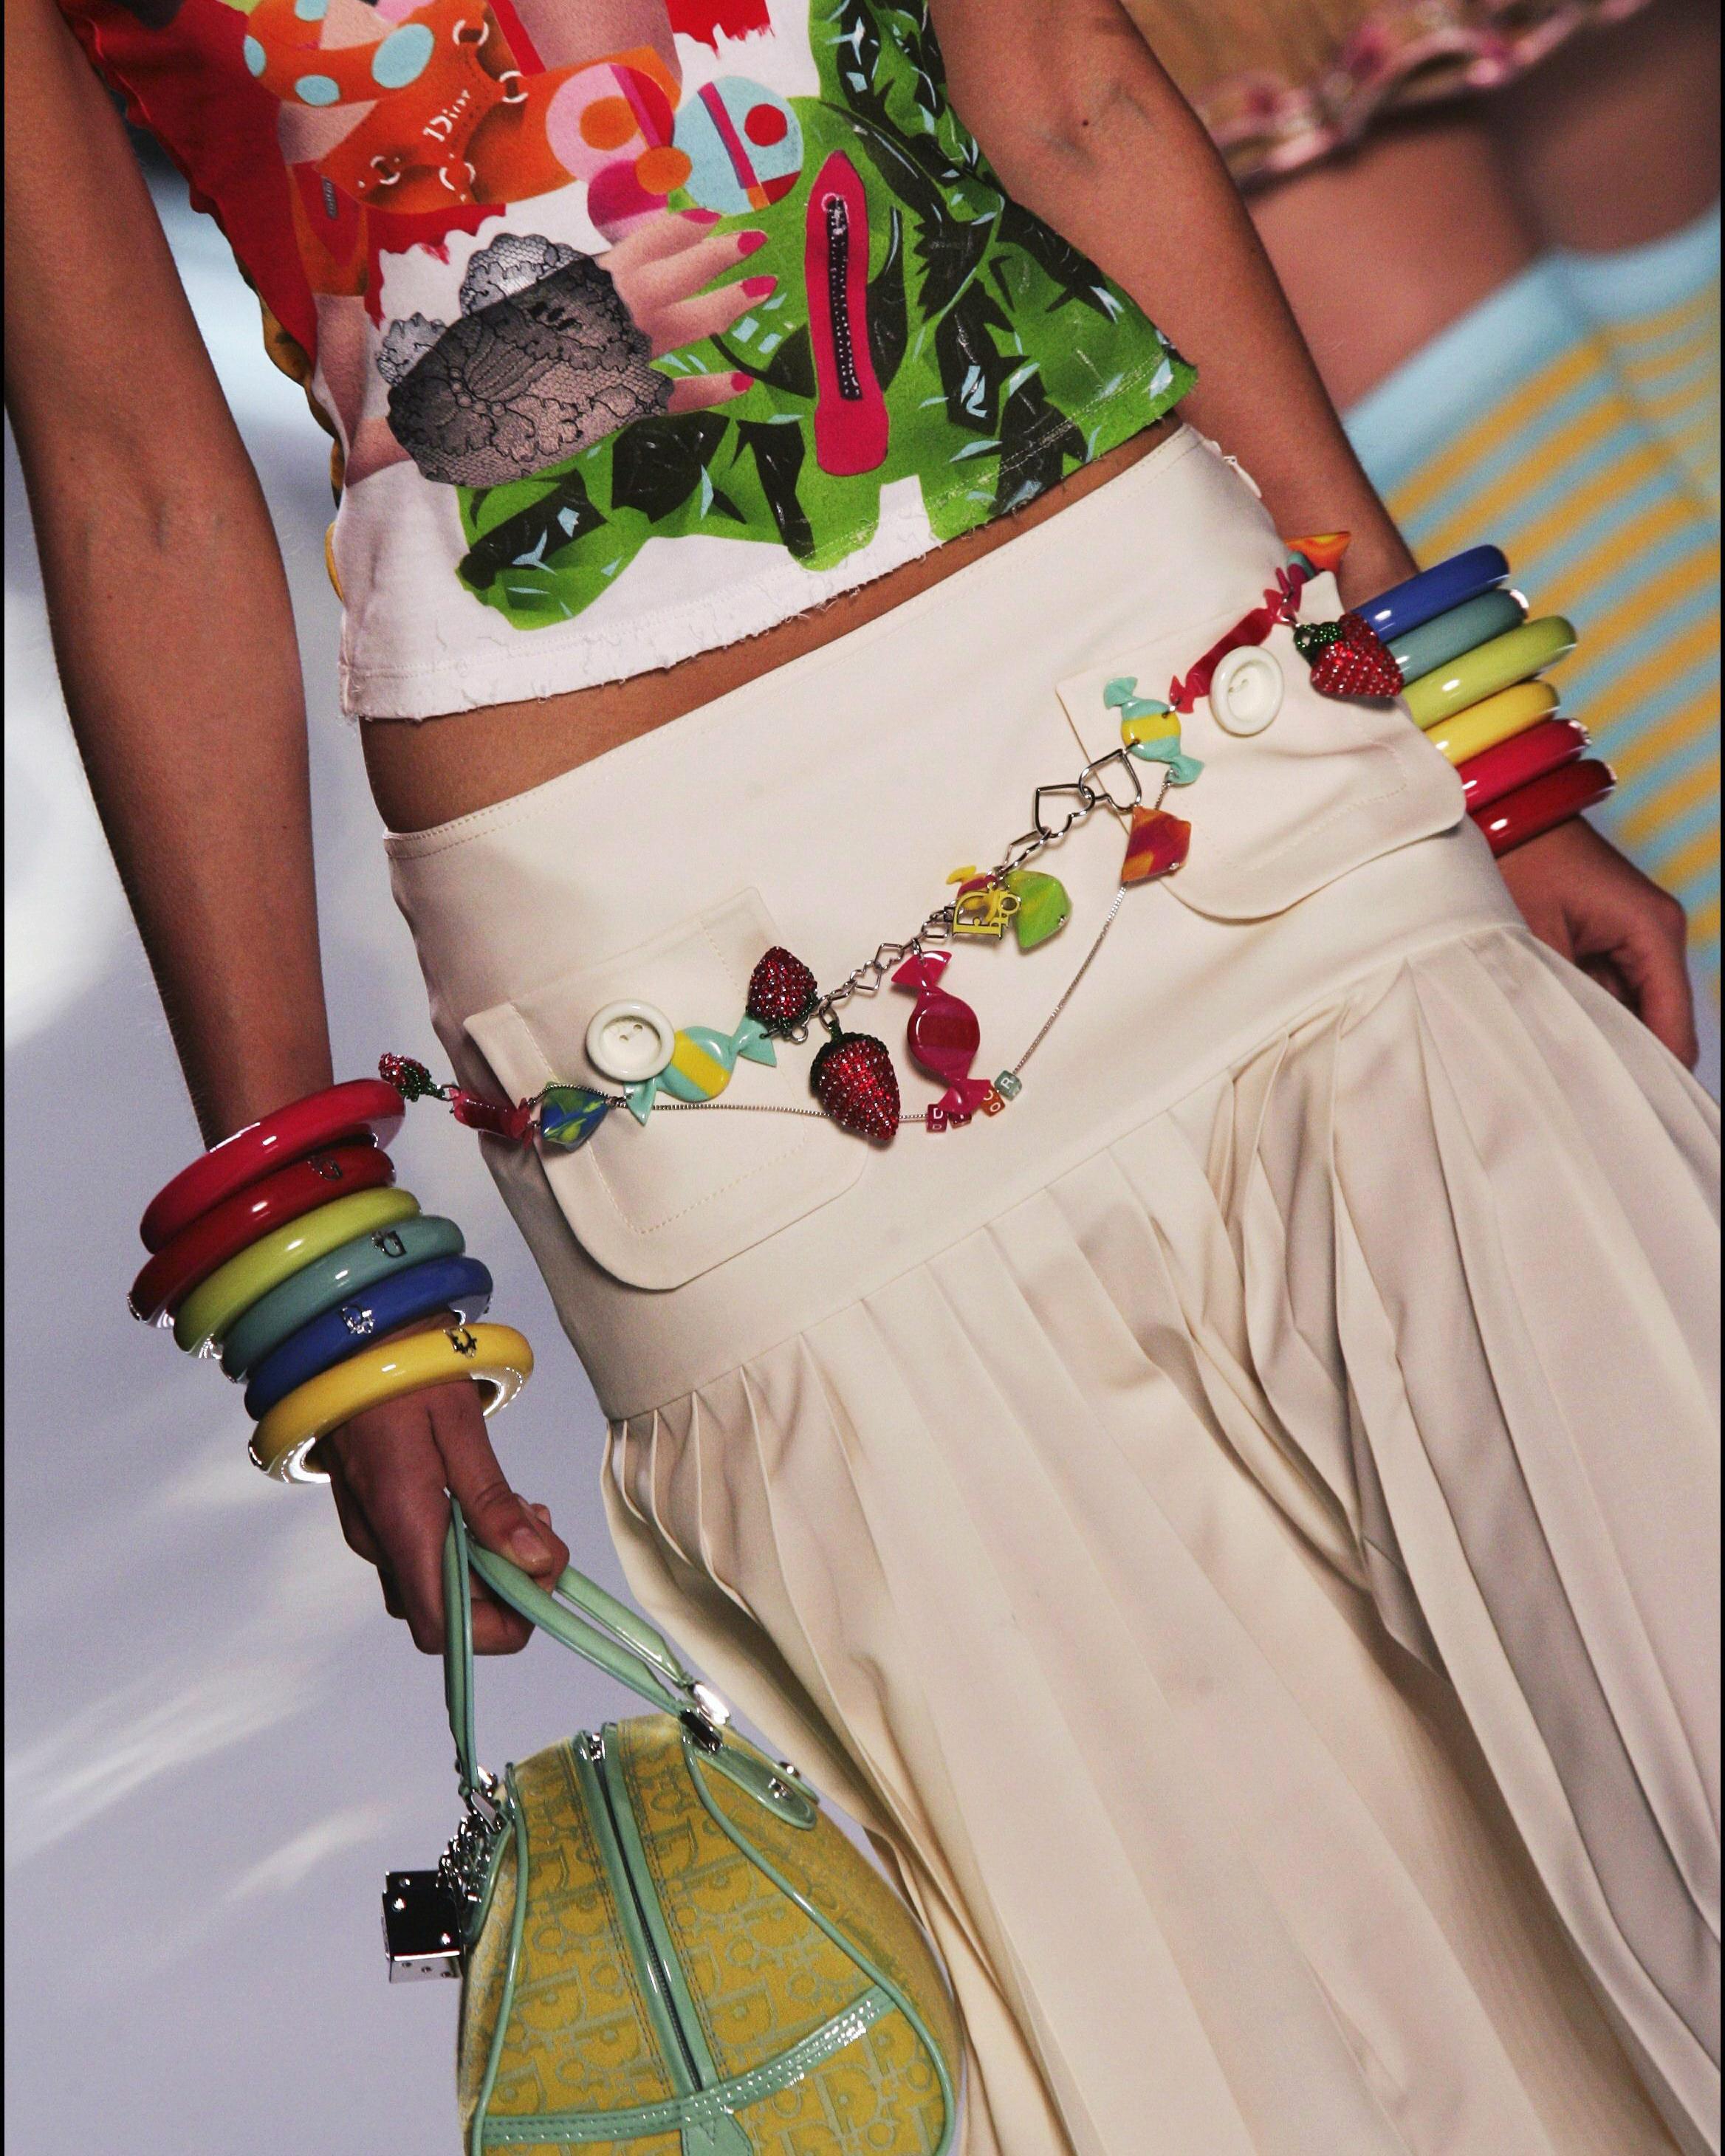 S/S 2005 Christian Dior by John Galliano long candy necklace with 3D strawberries and clip-on candy earring set. Can be styled as long necklace, choker necklace, or belt depending on desired styling. Multicolor plastic candies on silver tone chain